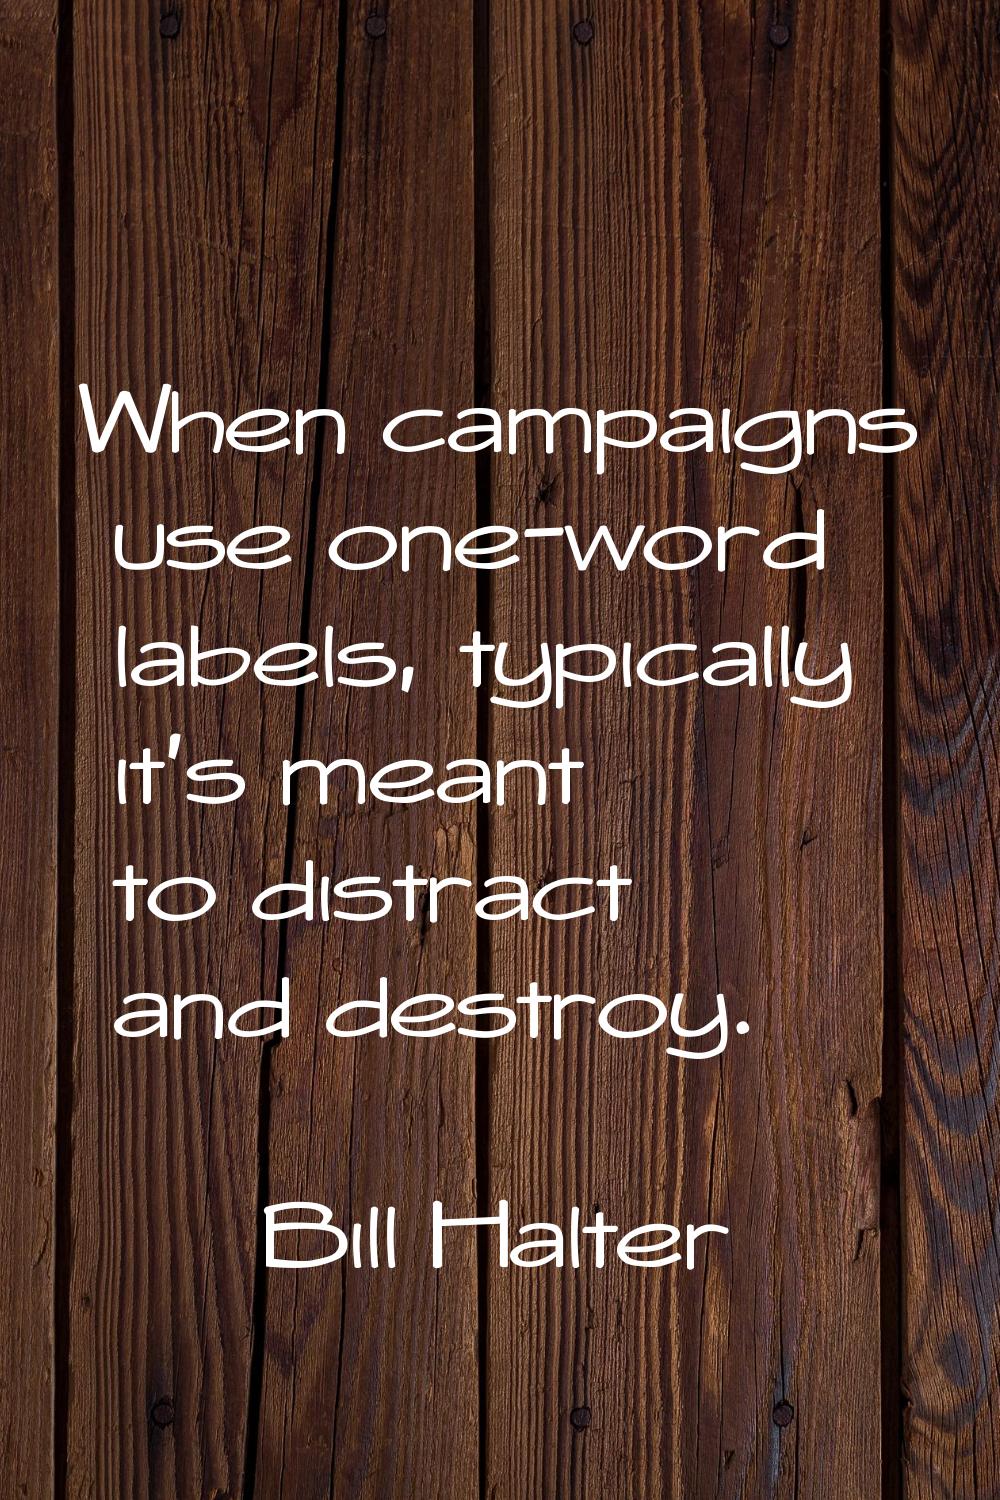 When campaigns use one-word labels, typically it's meant to distract and destroy.